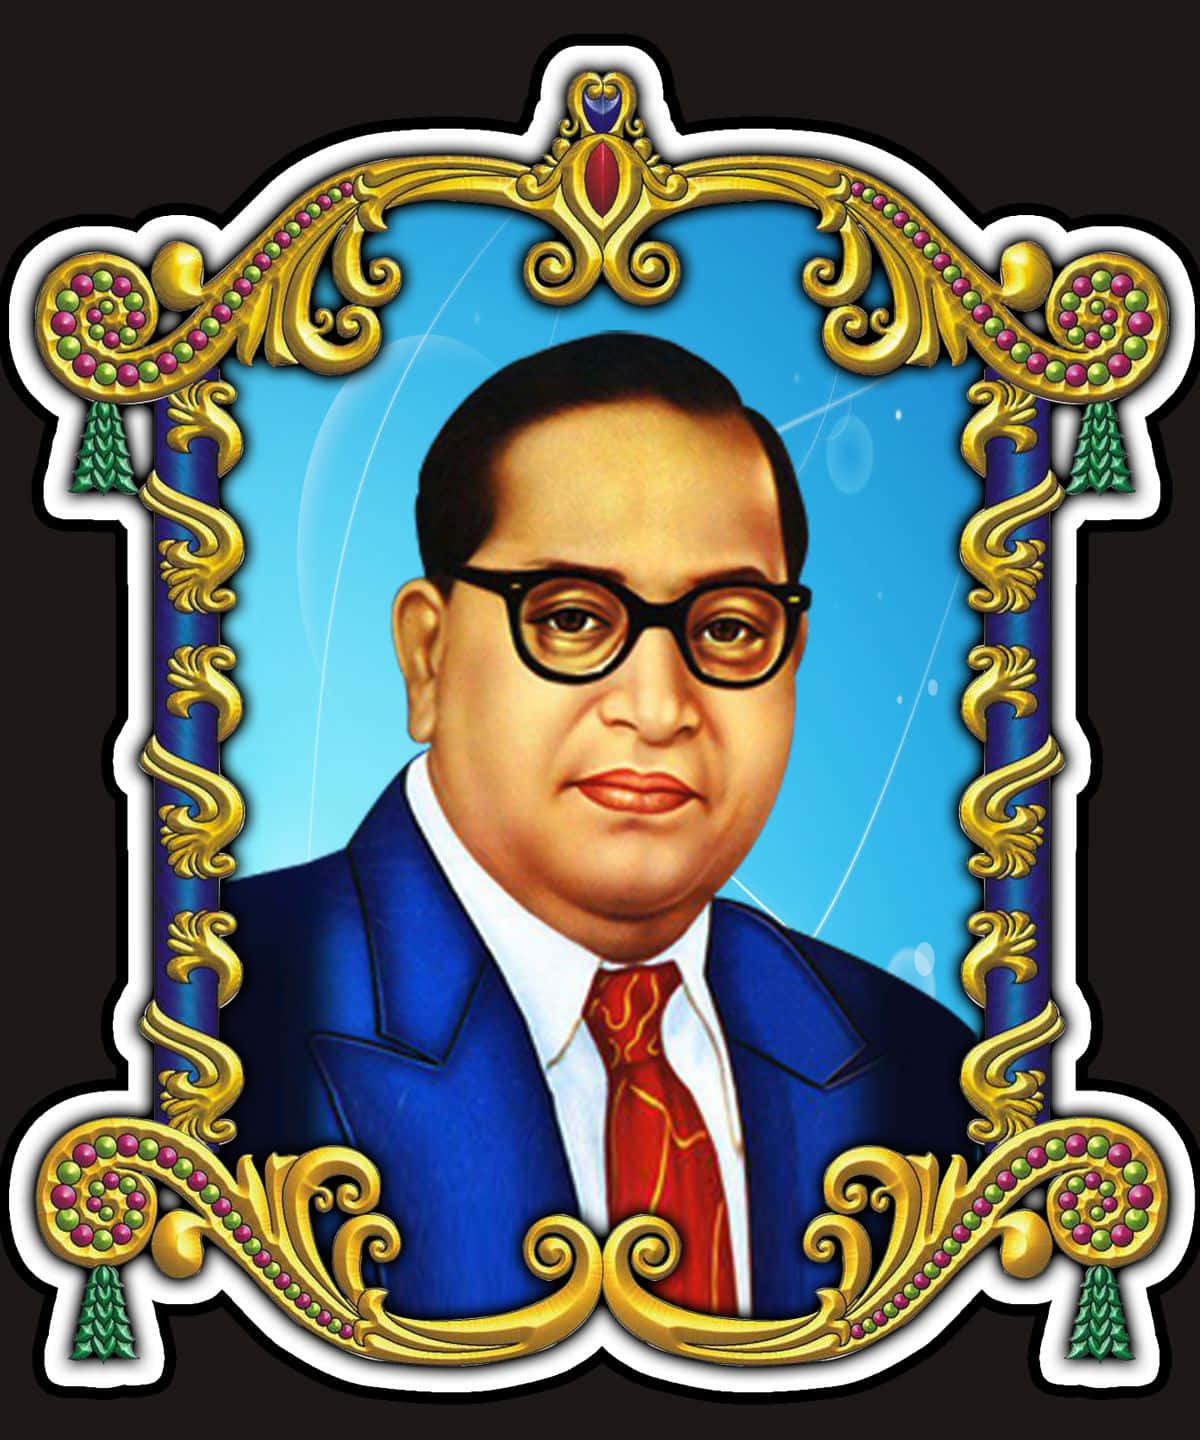 Dr. B.R. Ambedkar - Intellectual Giant and Architect of the Indian Constitution